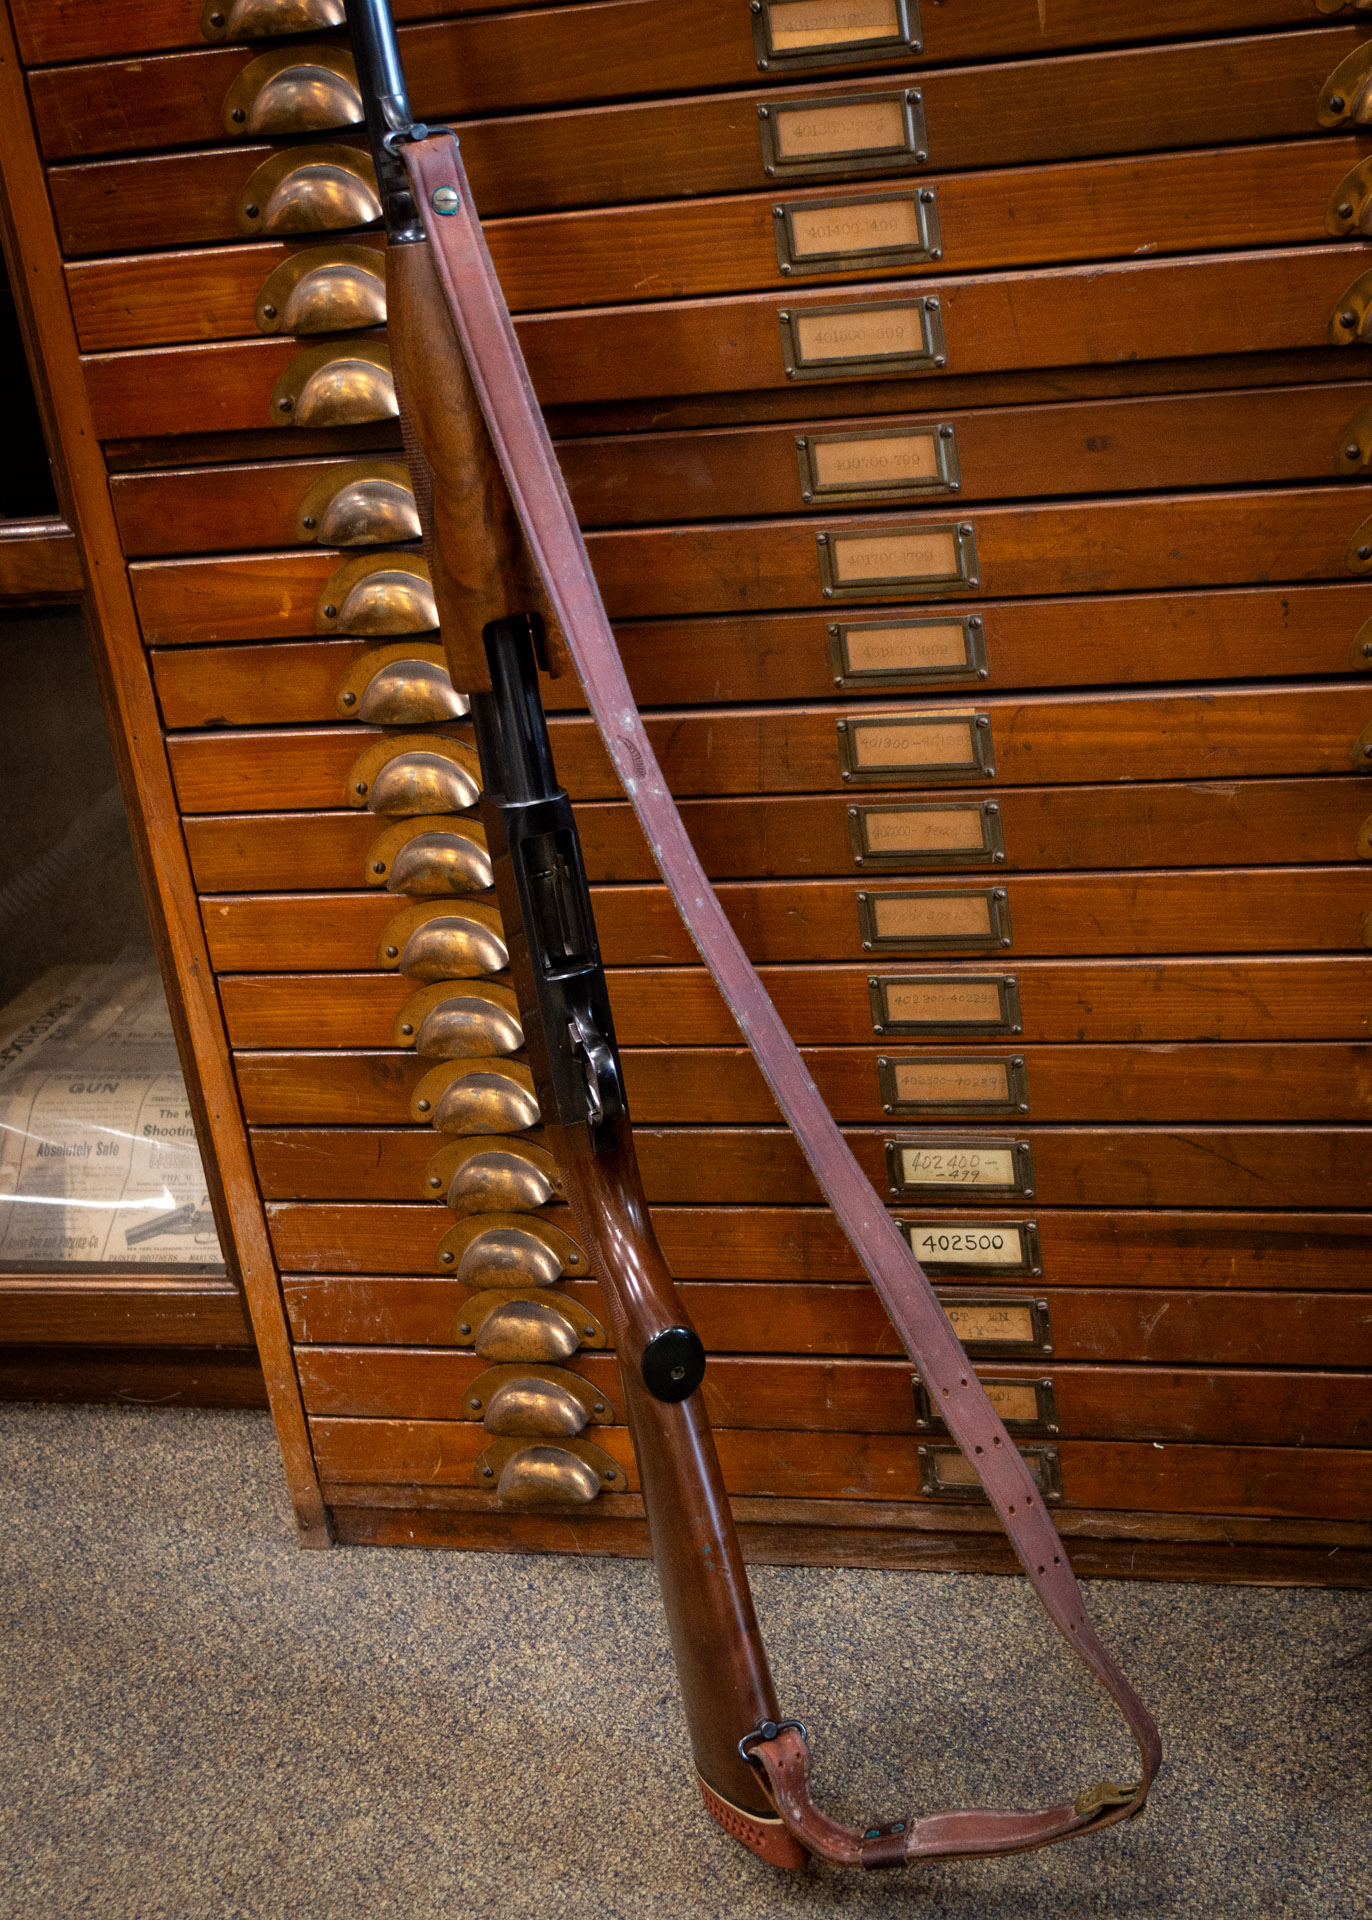 Photo of a pre-owned Ithaca 37R Deluxe Featherweight 12 gauge shotgun, for sale by Turnbull Restoration of Bloomfield, NY